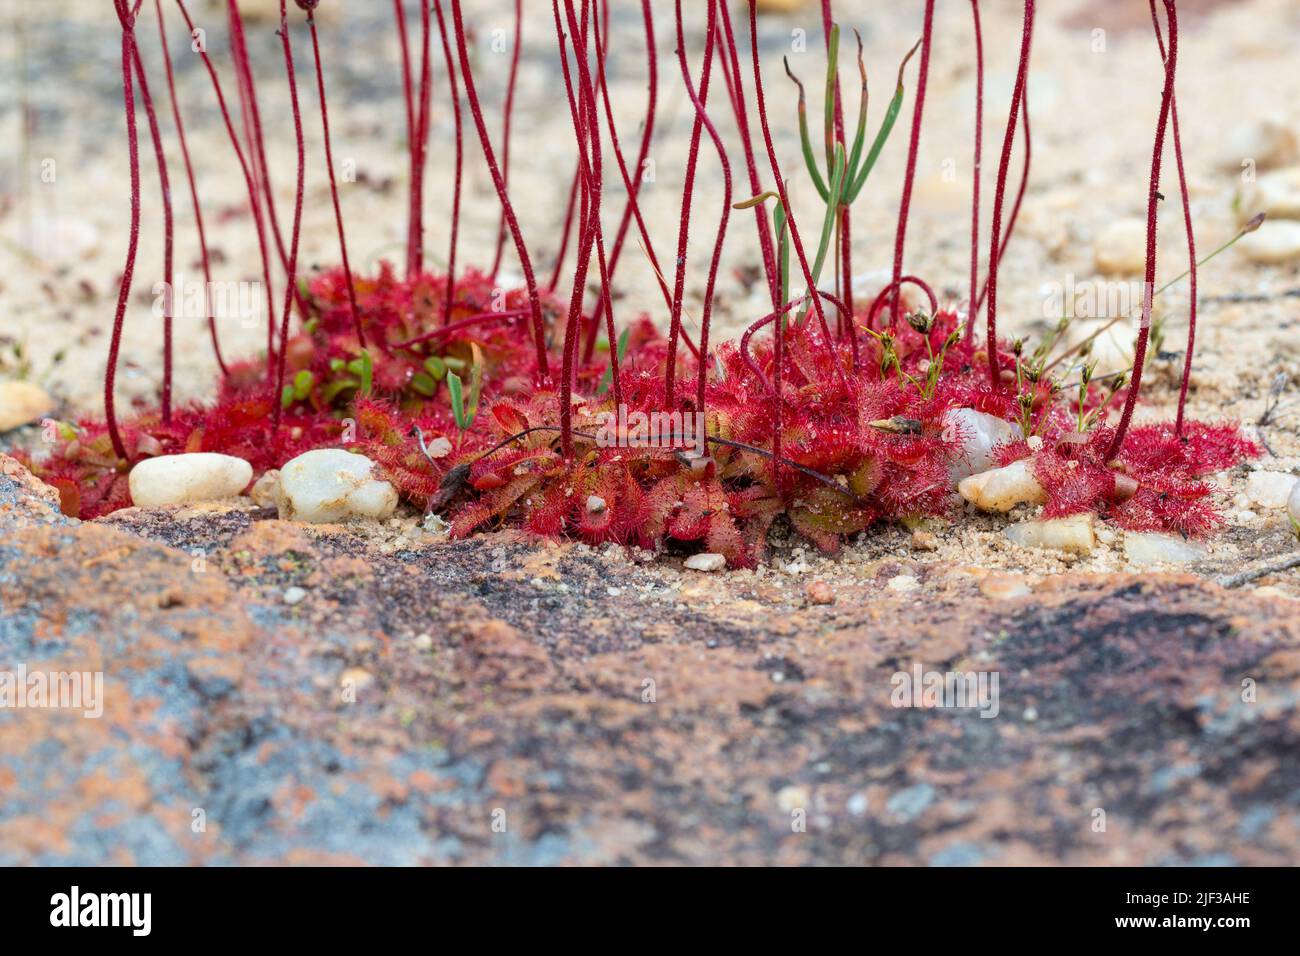 Group of some Sundews (a carnivorous plant of the genus Drosera) seen on the Bokkeveld Plateau near Nieuwoudtville, Northern Cape of South Afric Stock Photo